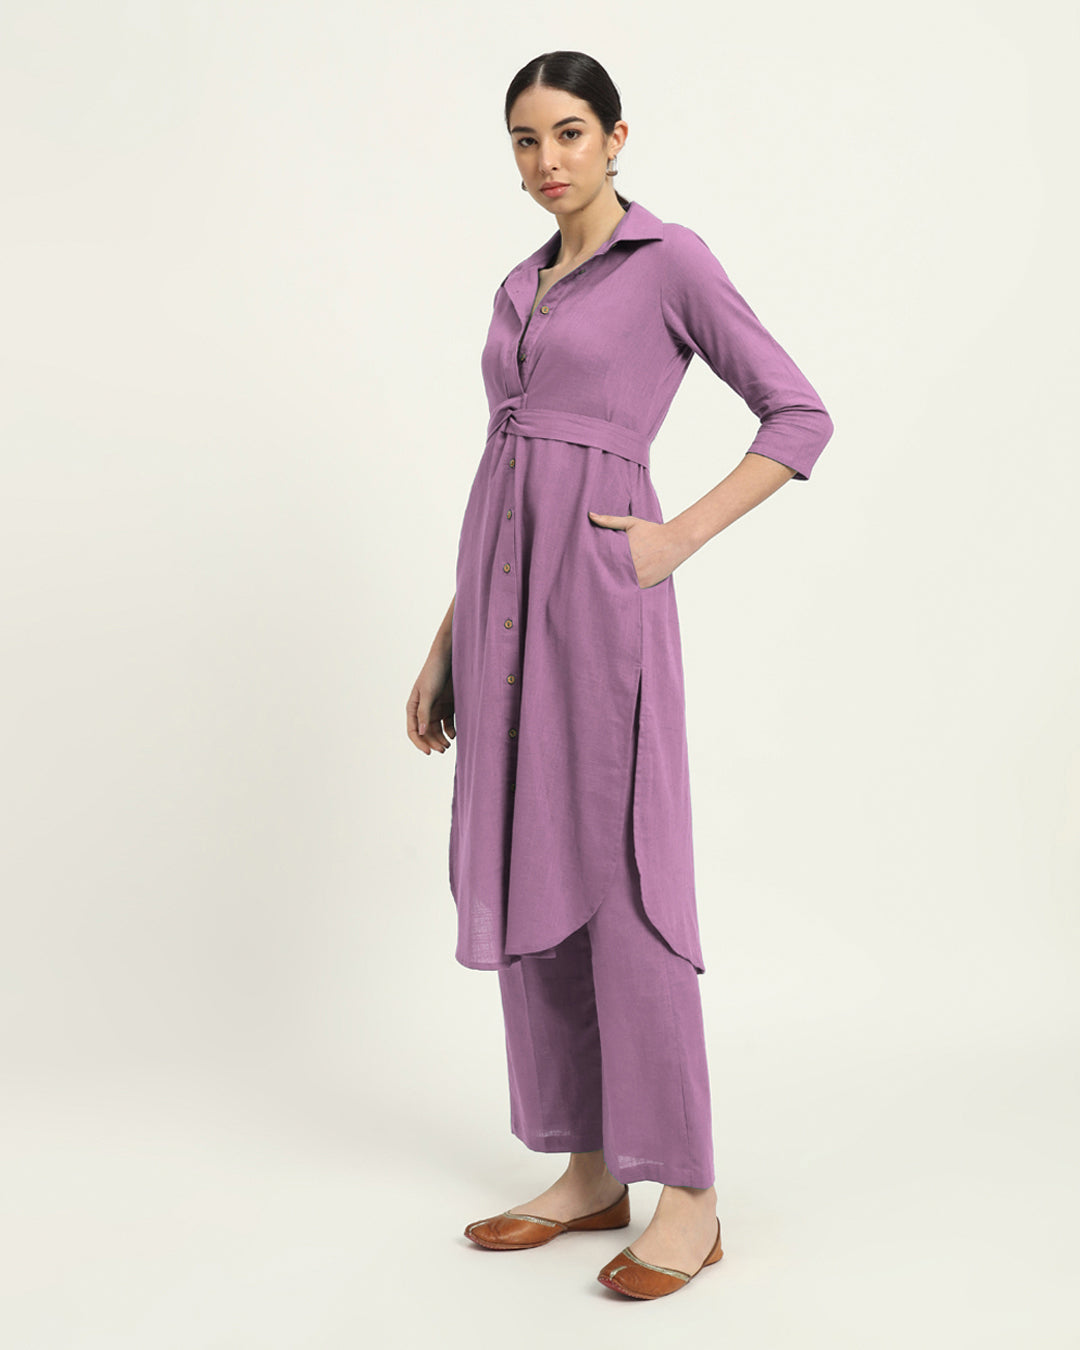 Iris Pink Bellisimo Belted Solid Kurta (Without Bottoms)